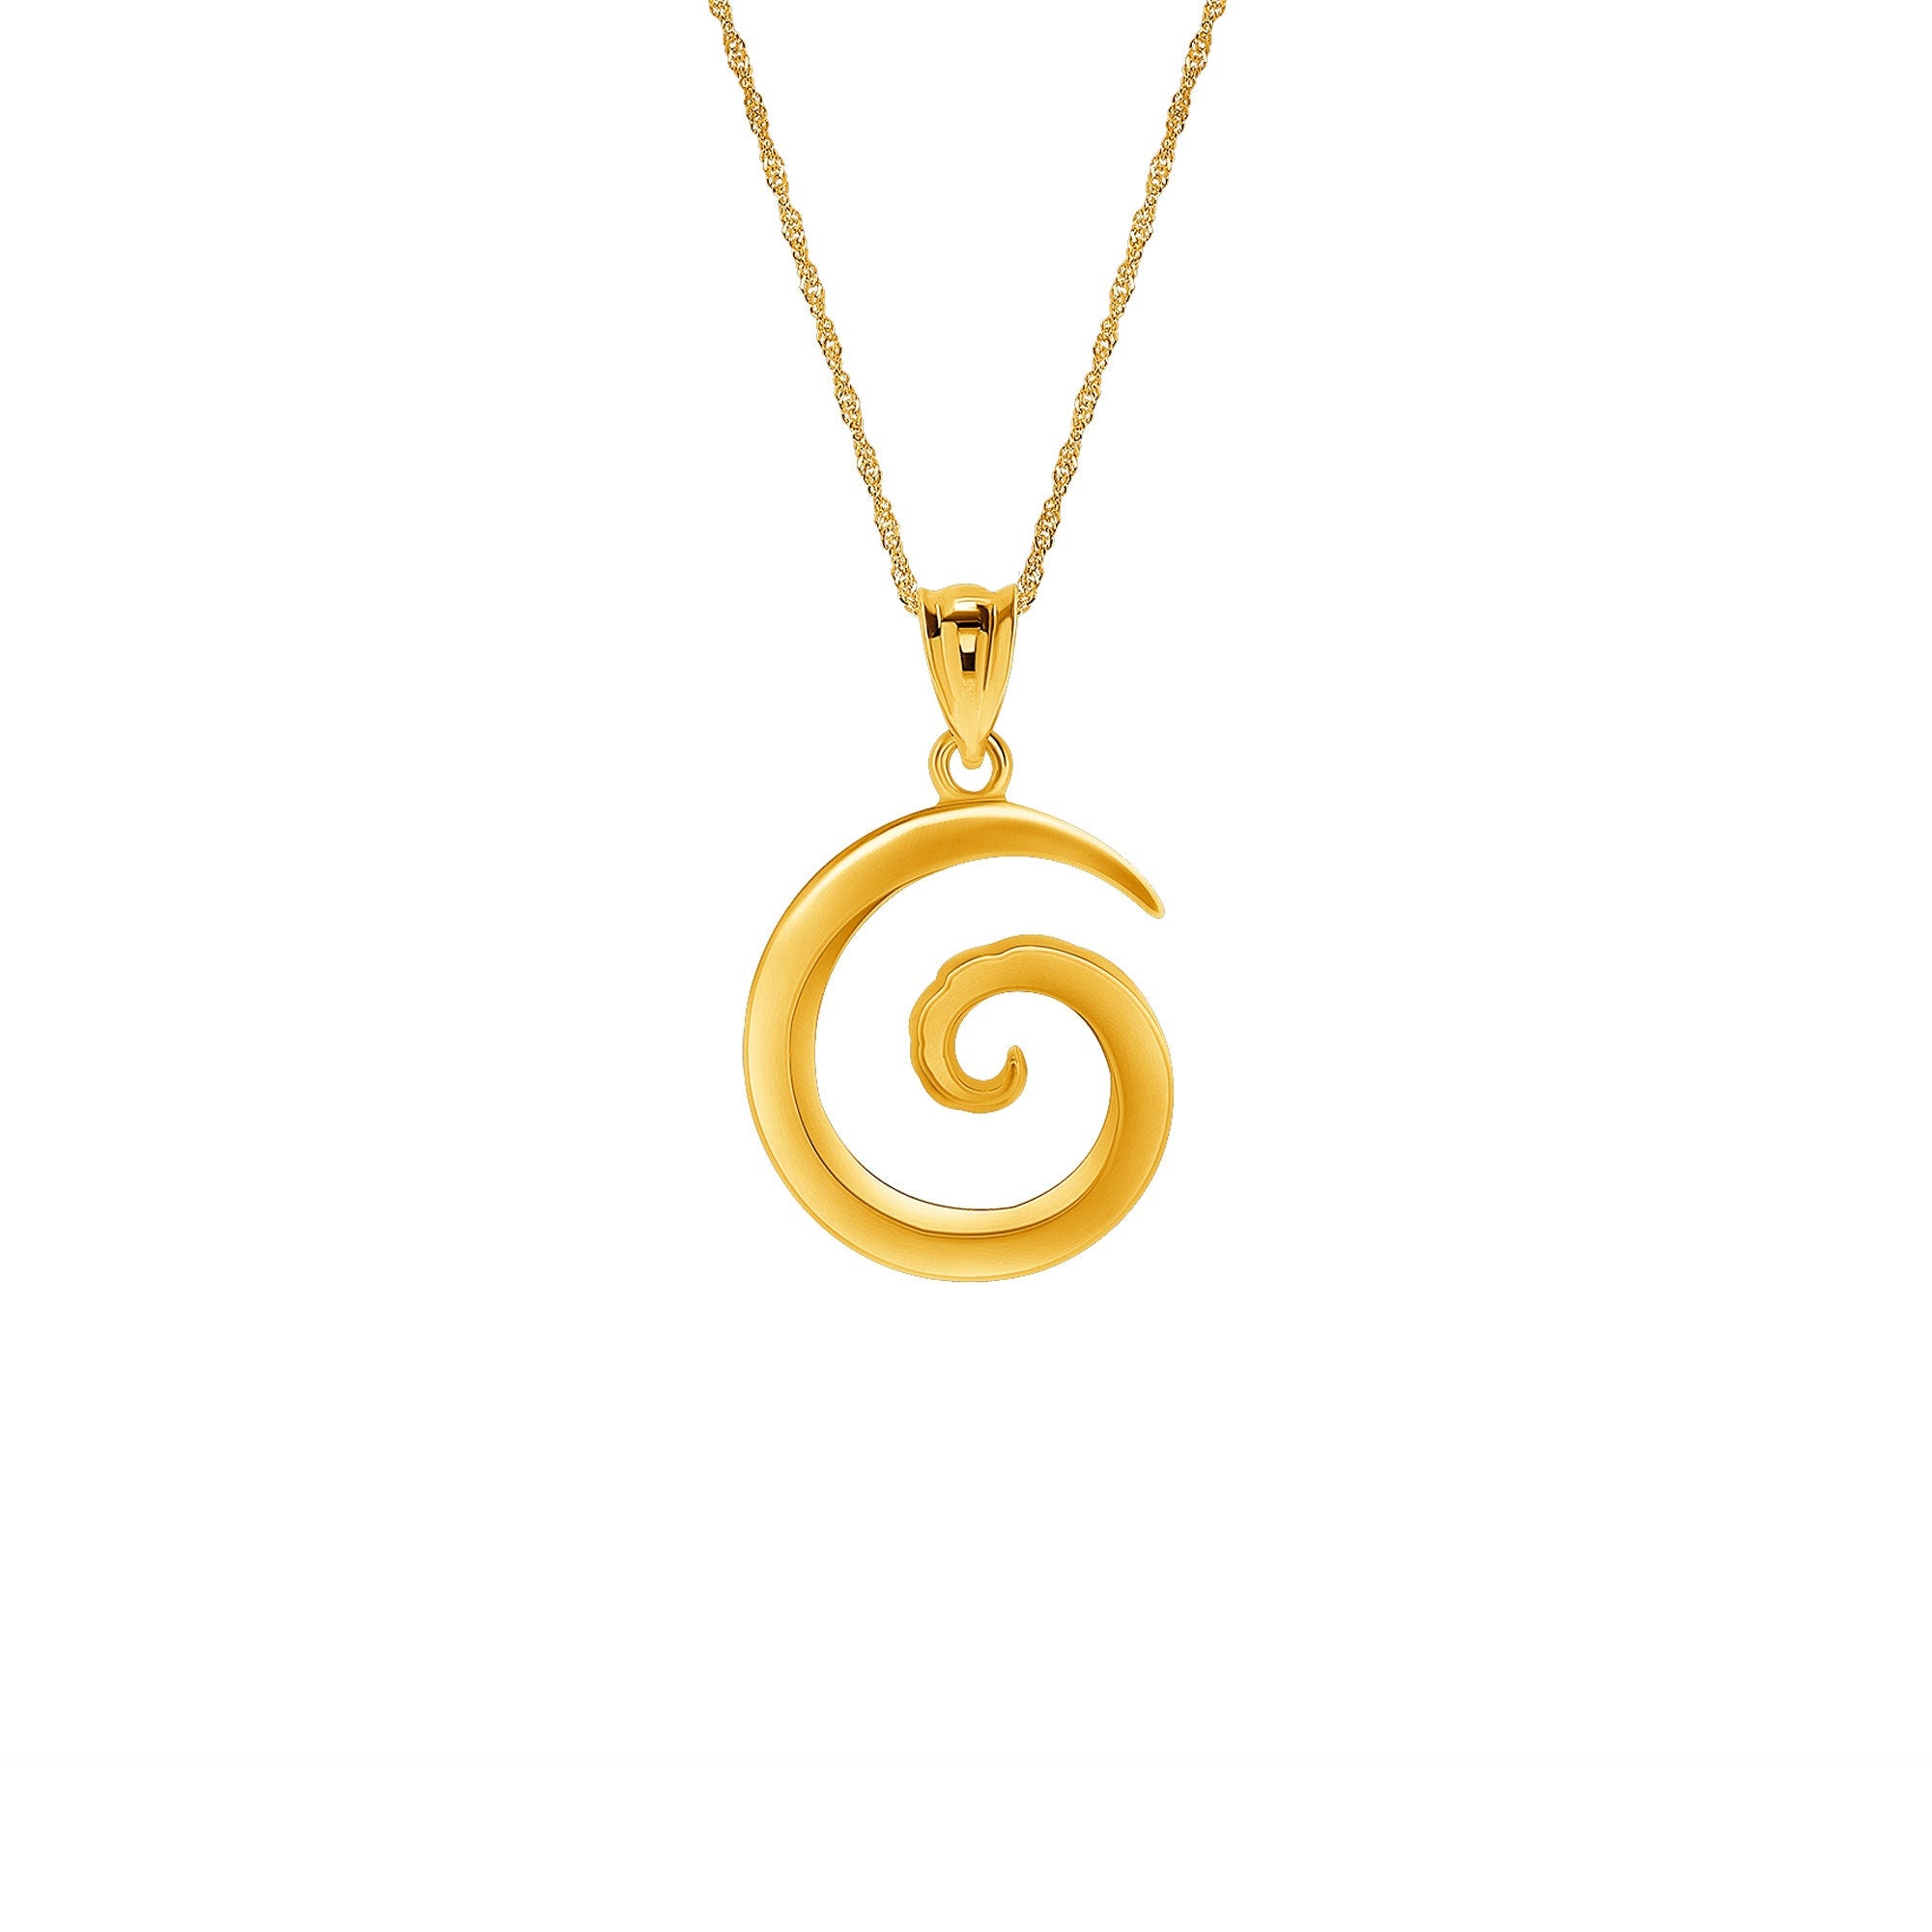 14k solid gold wave pendant on 18" solid gold chain